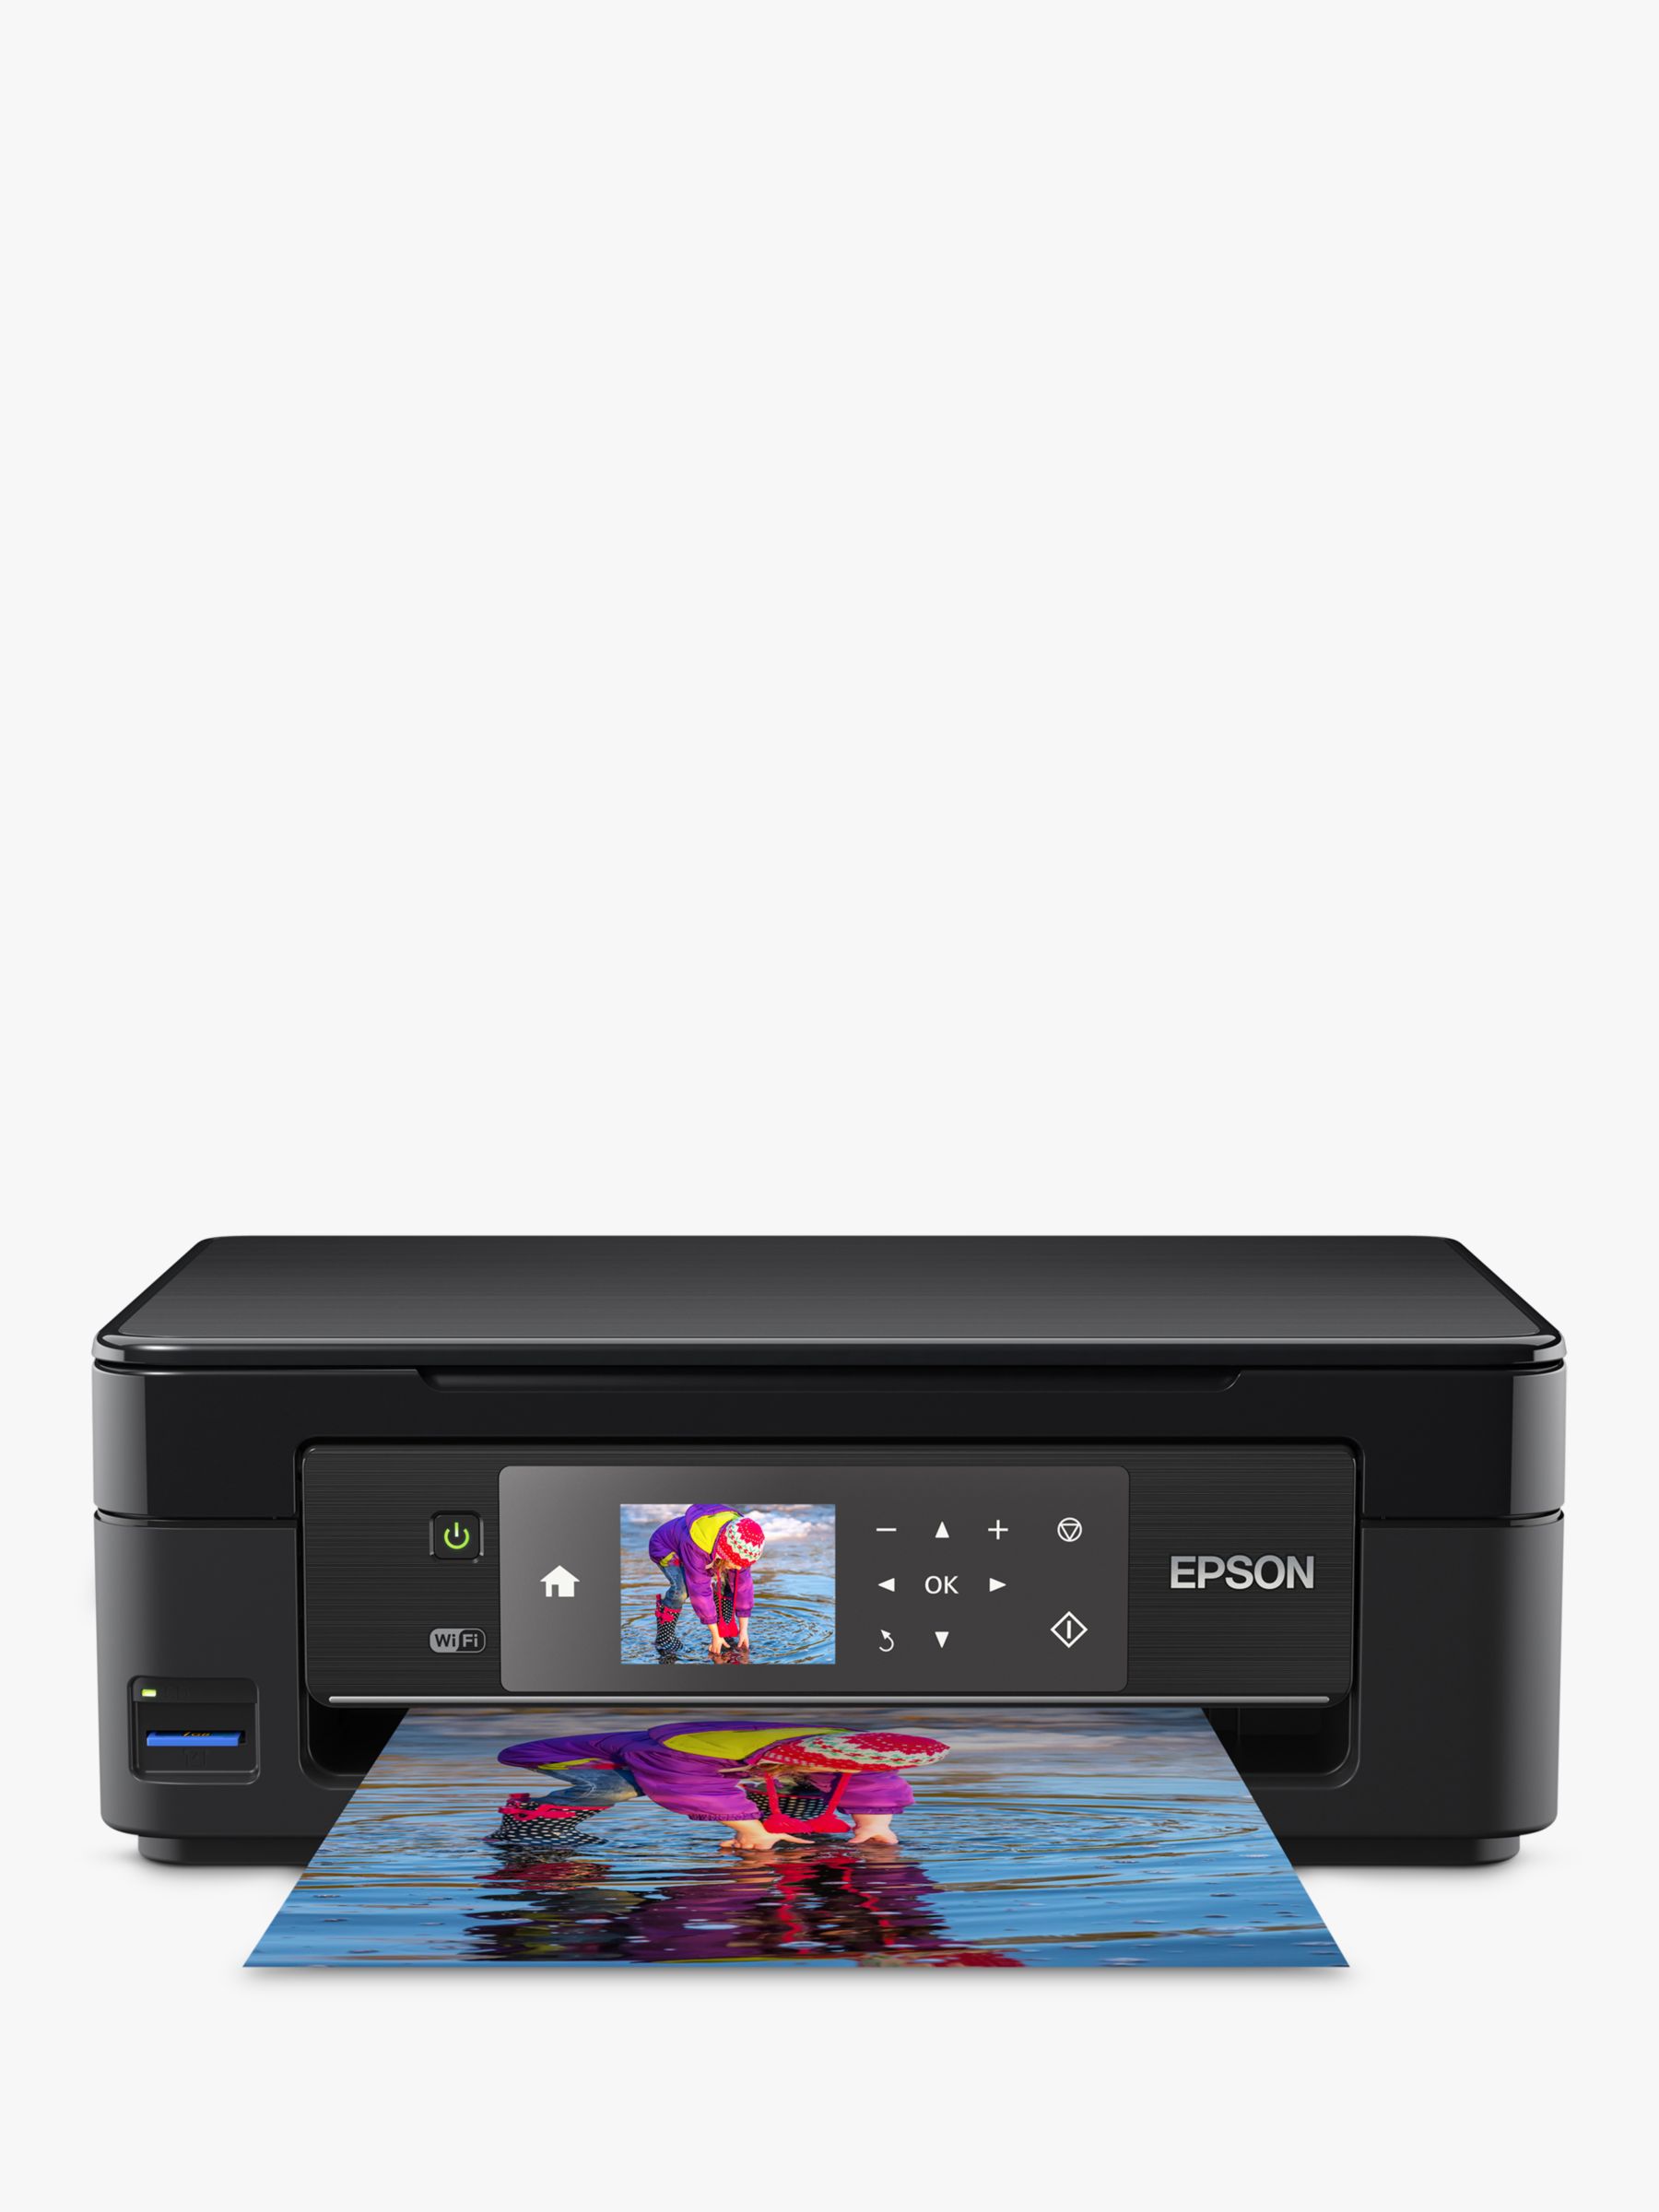 Epson Expression Home Xp 452 Wi Fi All In One Printer Black And Epson Strawberry T2986 Inkjet 4262